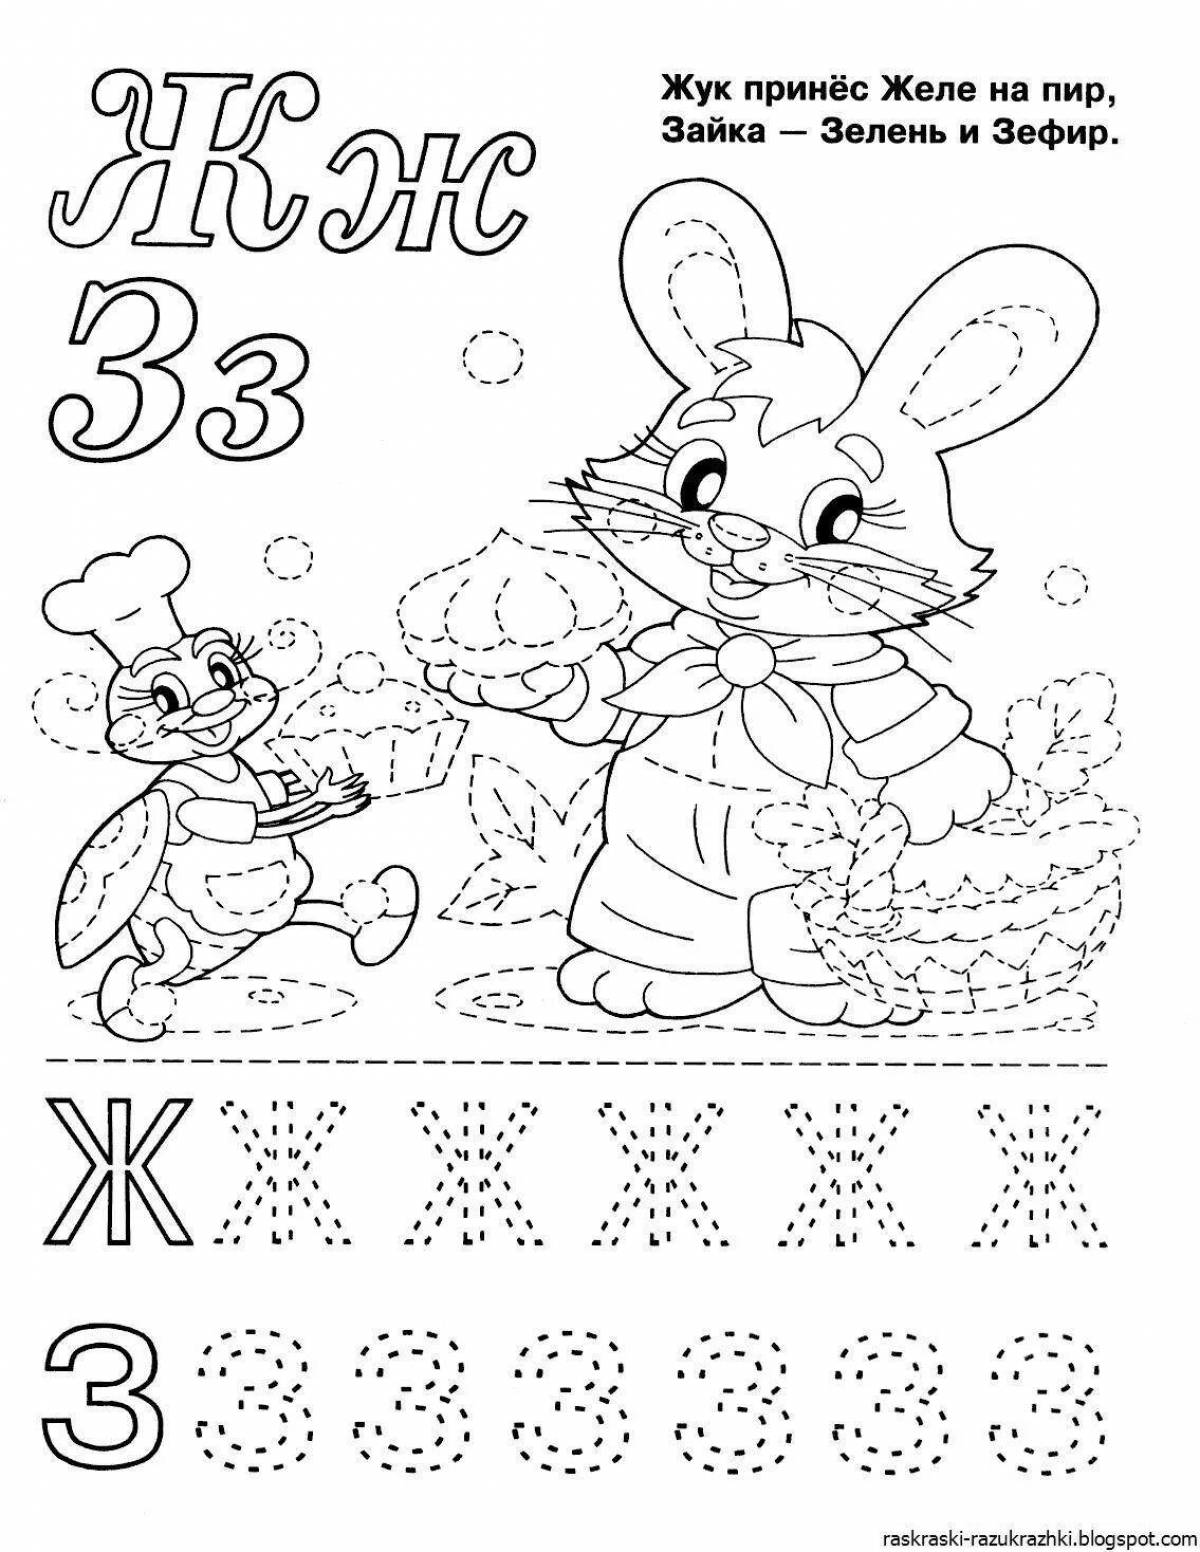 Creative alphabet coloring book for 5 year olds